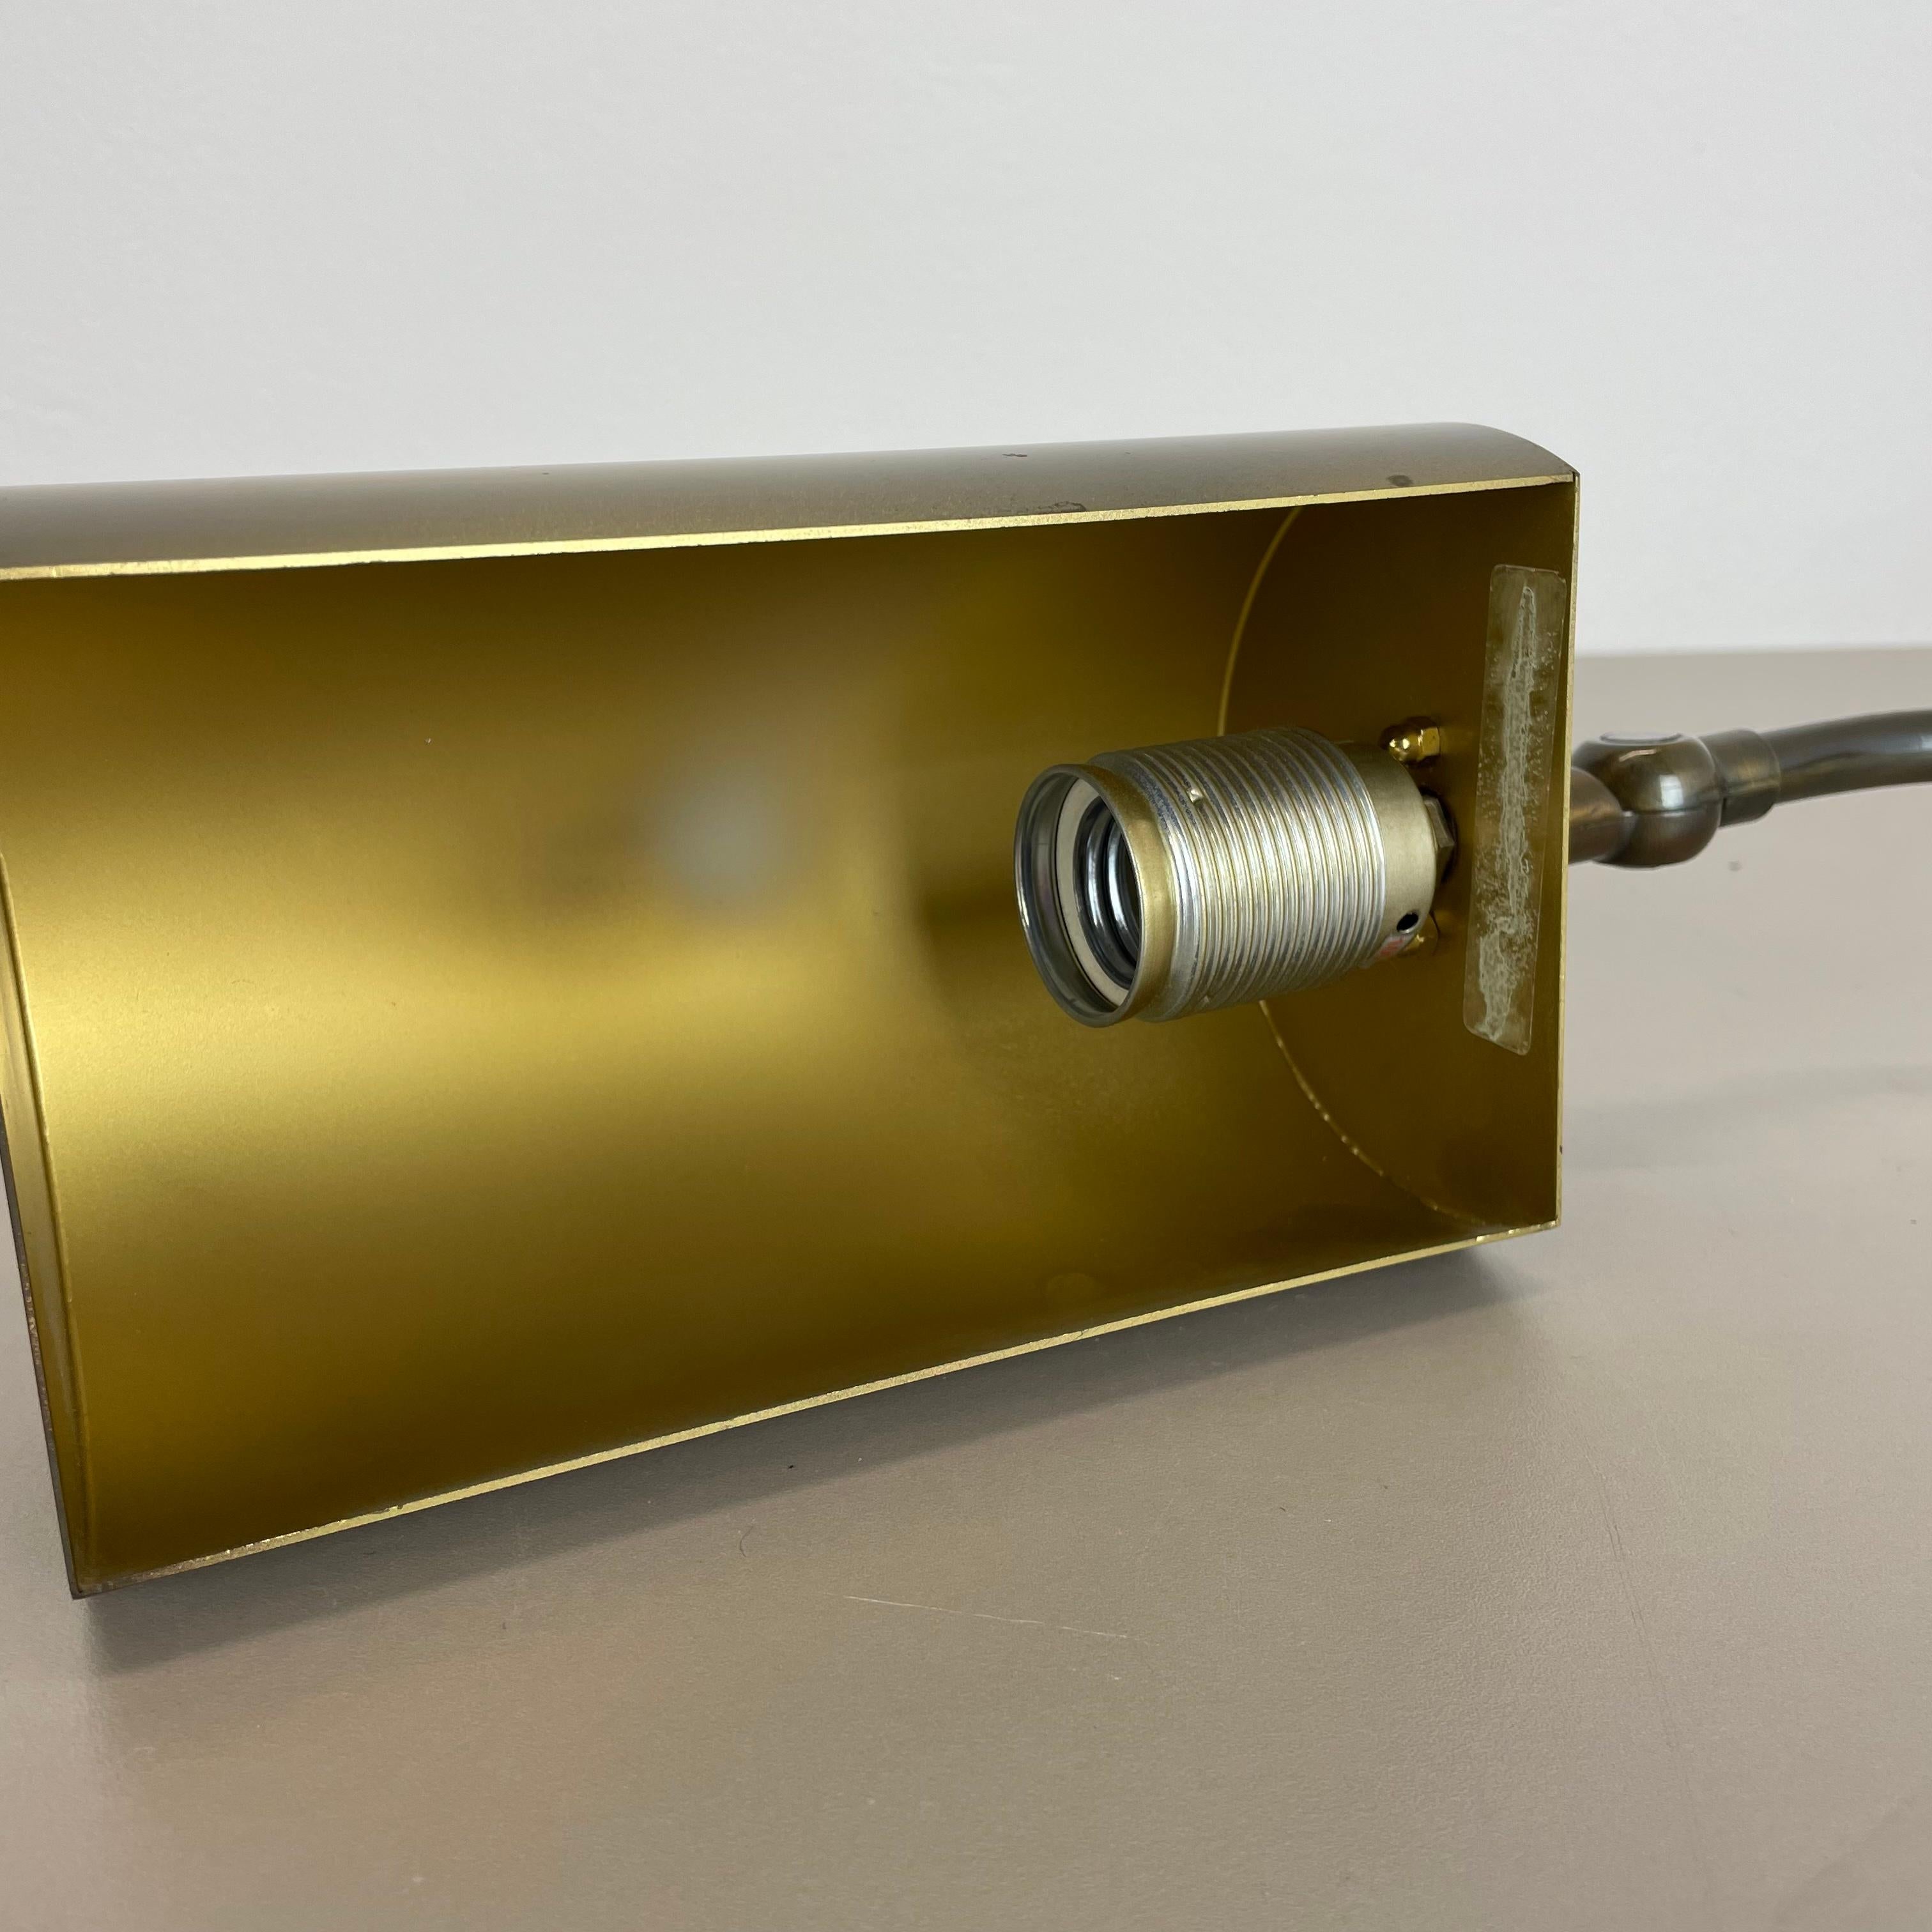 Beautiful Cubic Original Modernist Brass Metal Table Light, Germany, 1970s For Sale 10